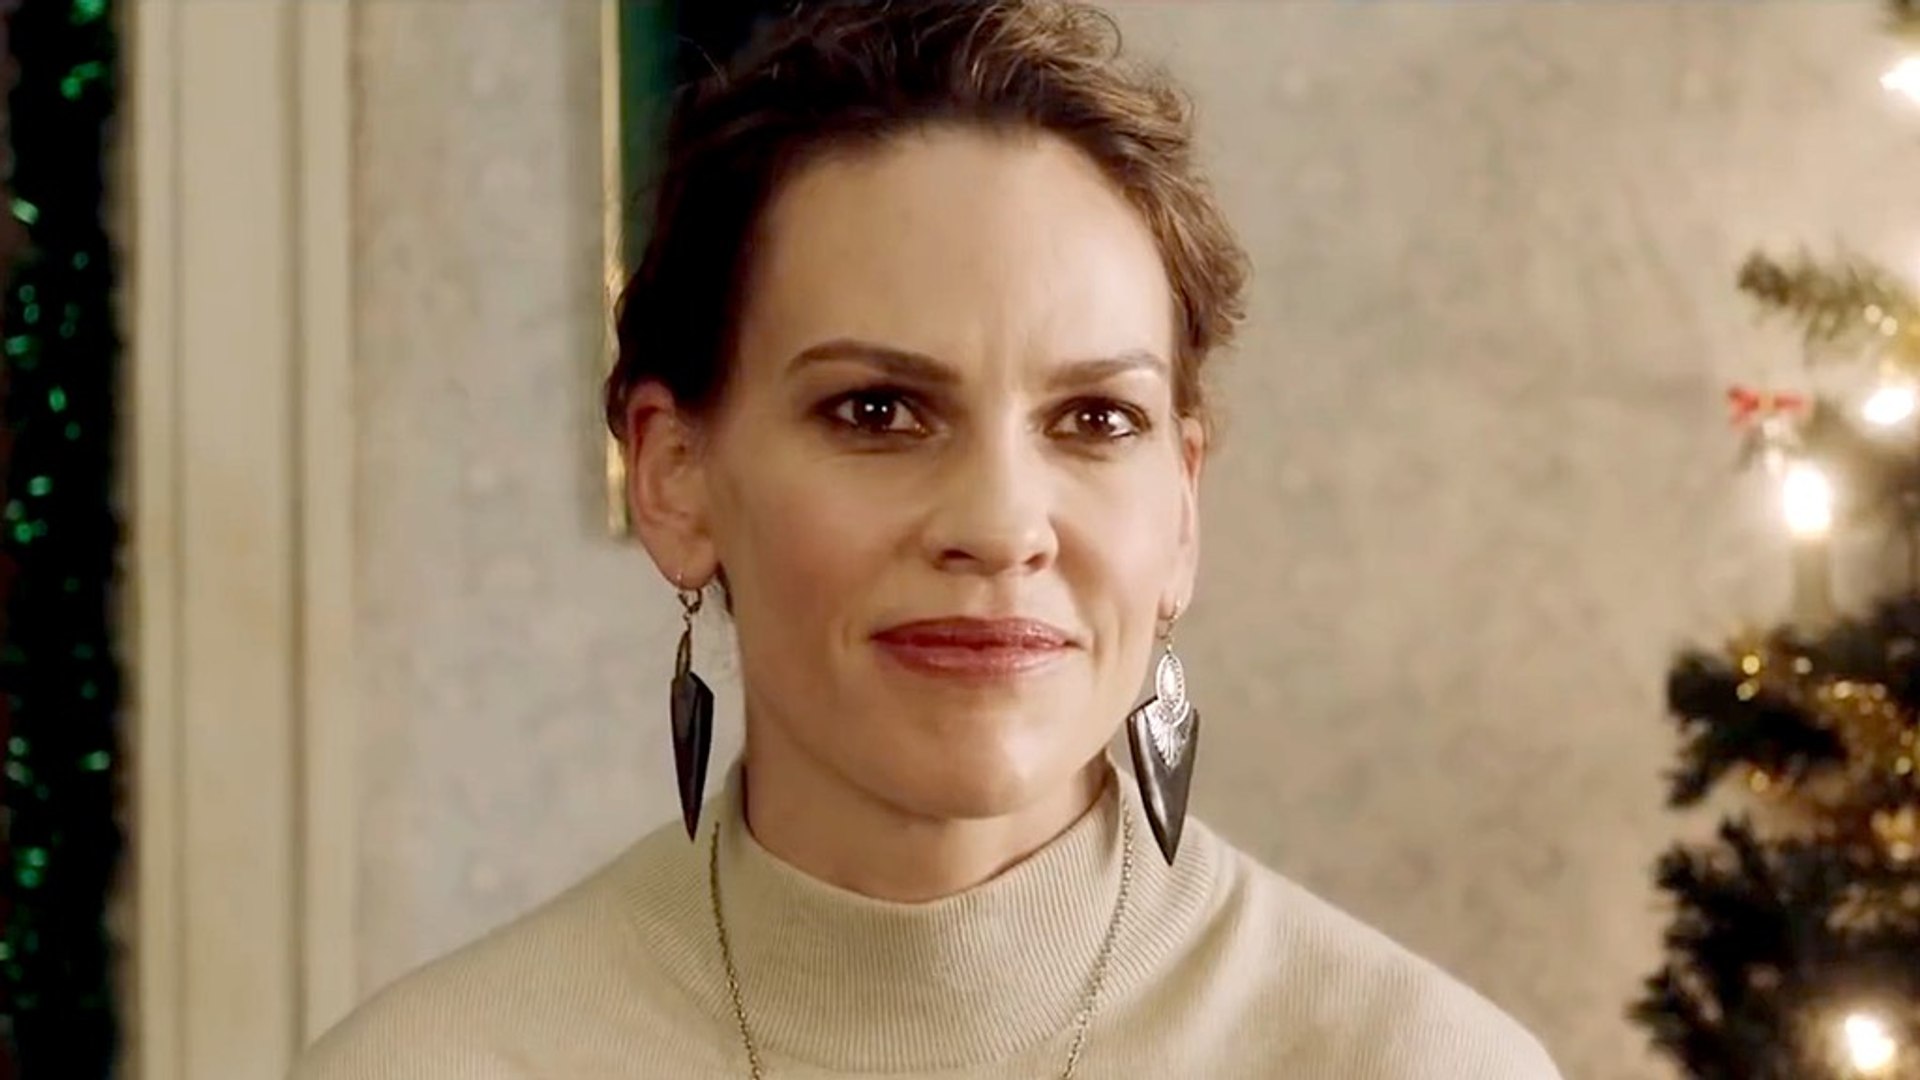 55 Steps with Hilary Swank - Official Trailer - video Dailymotion